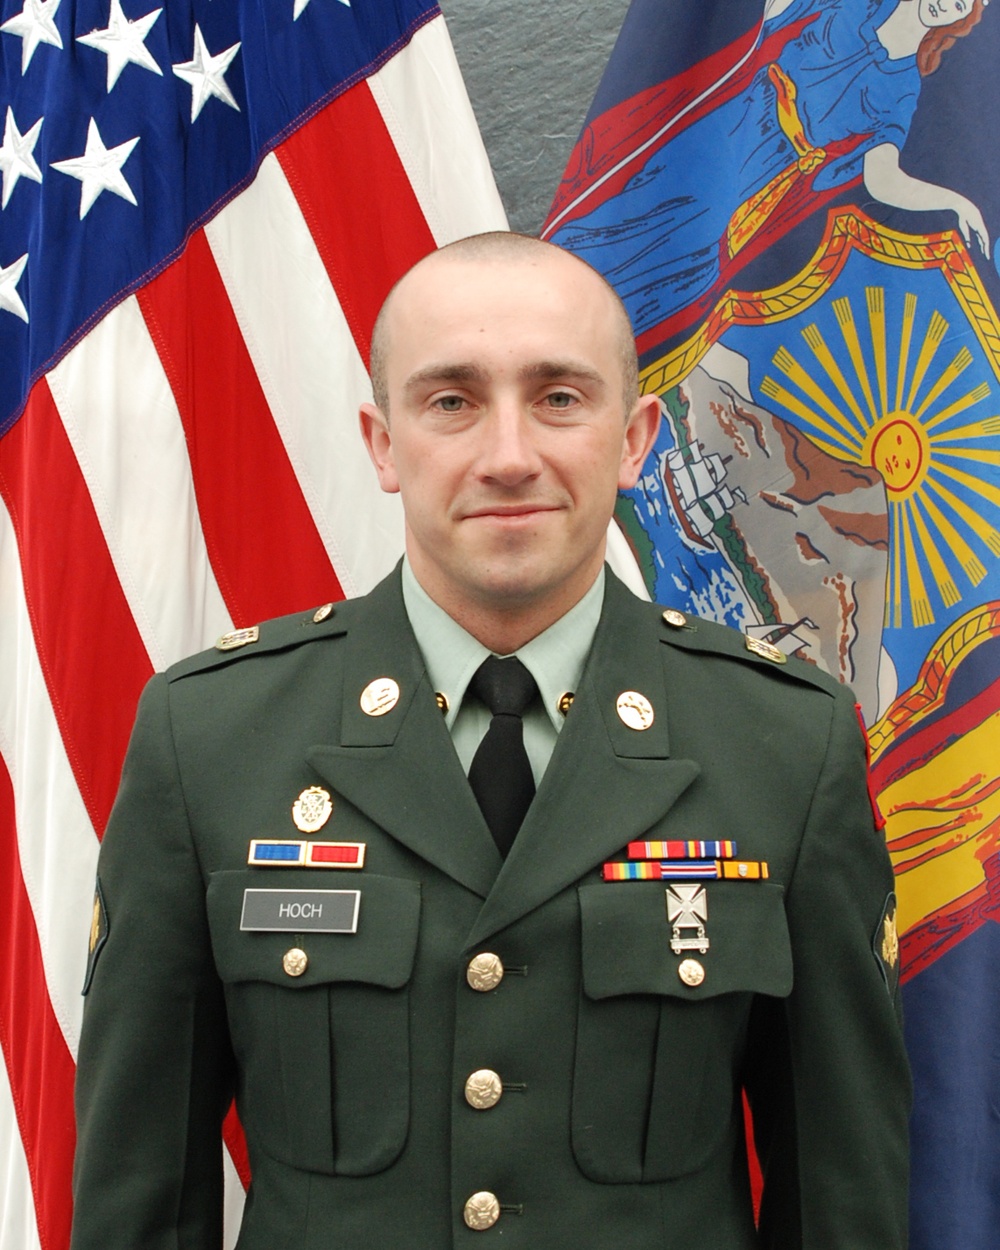 Buffalo College Student is New York Army Guard's Best Soldier